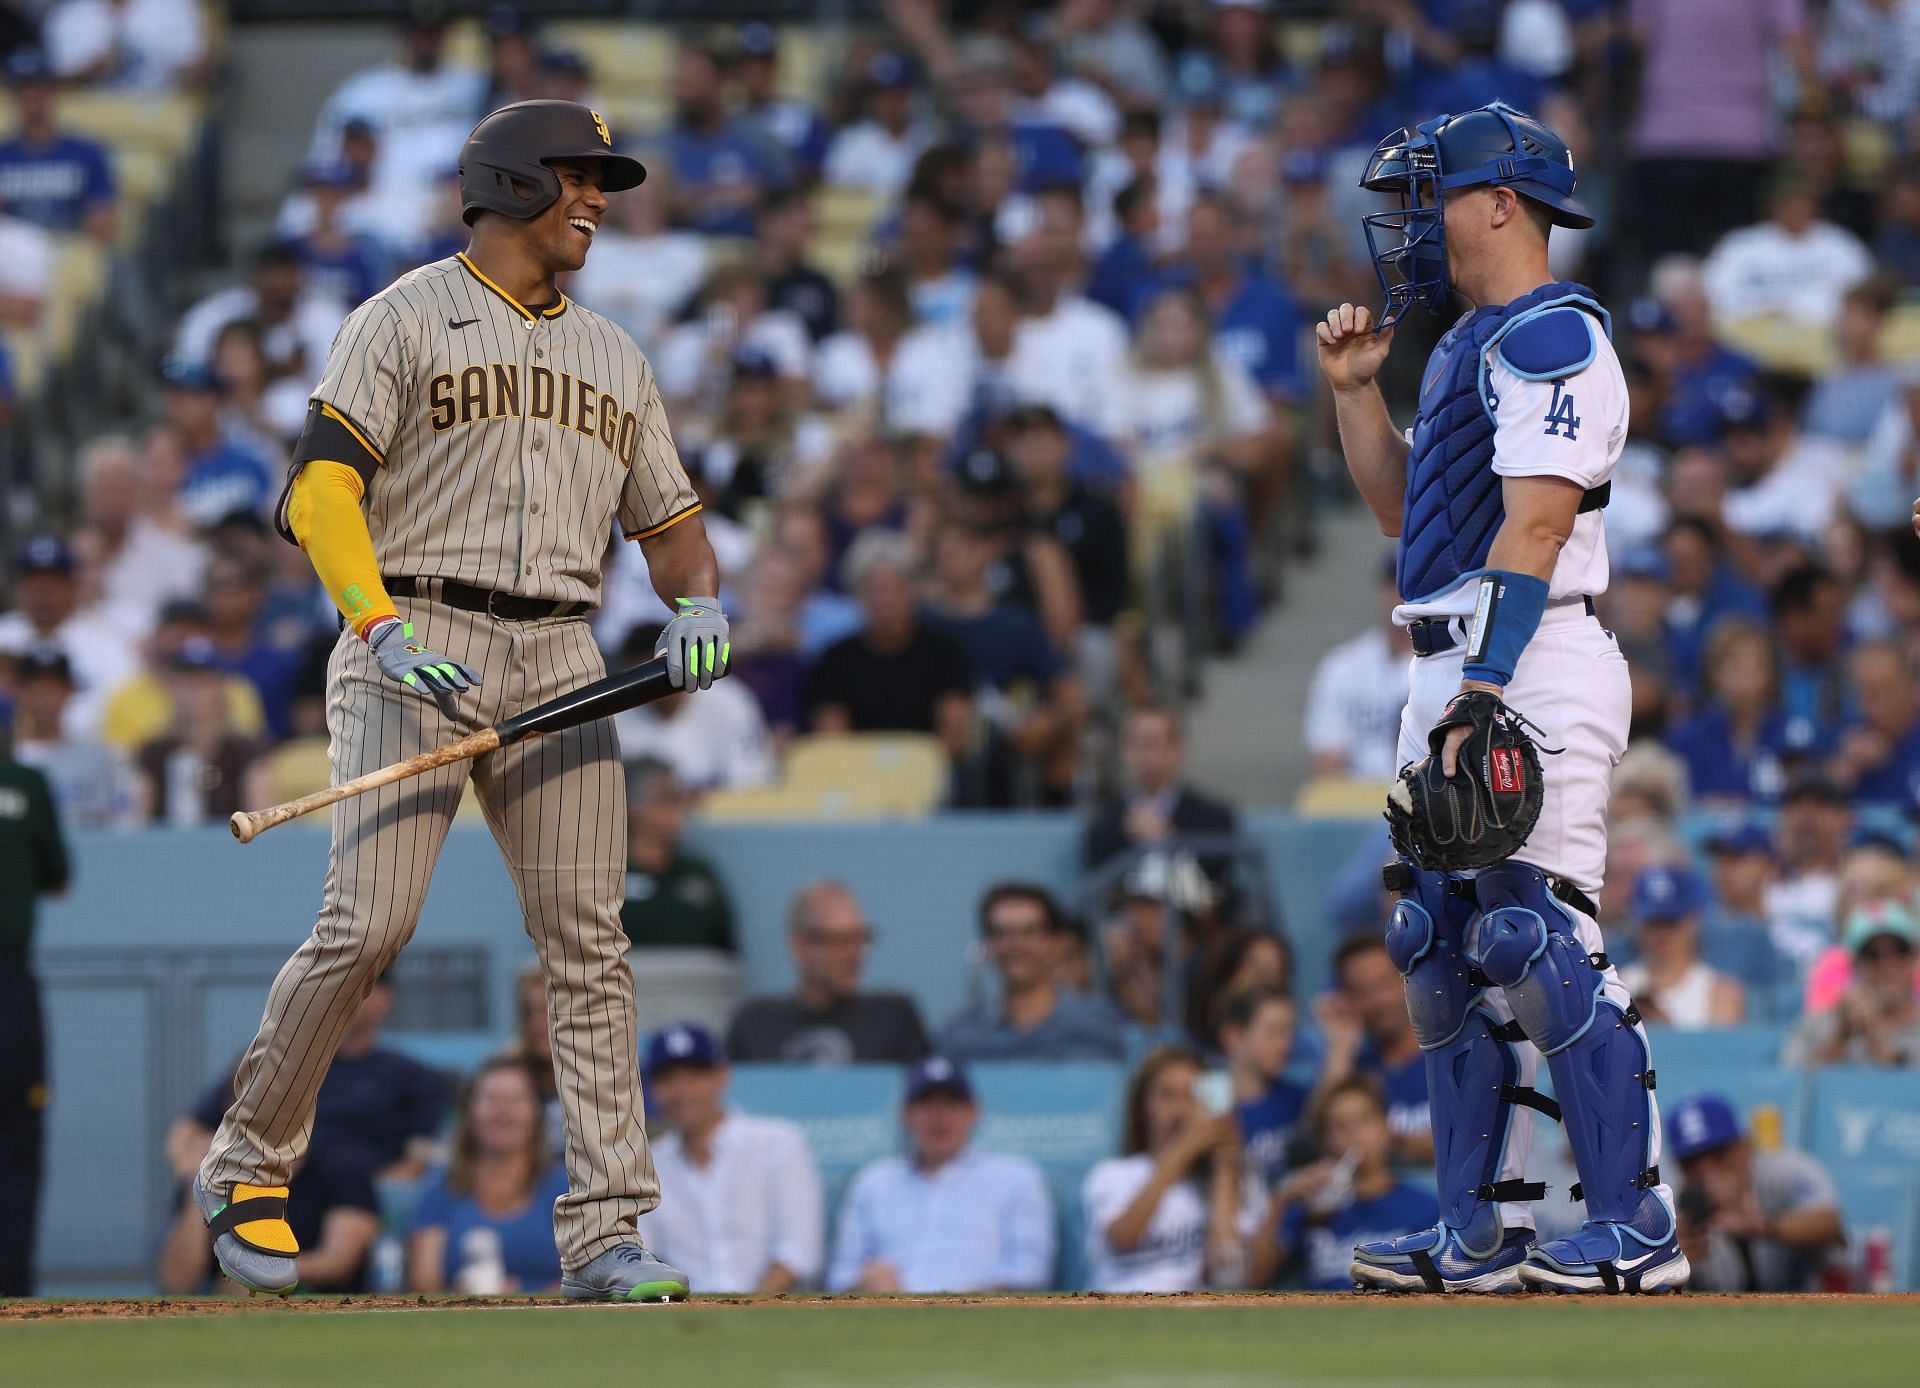 Dodgers: Manny Machado Unbothered By the Booing In Los Angeles